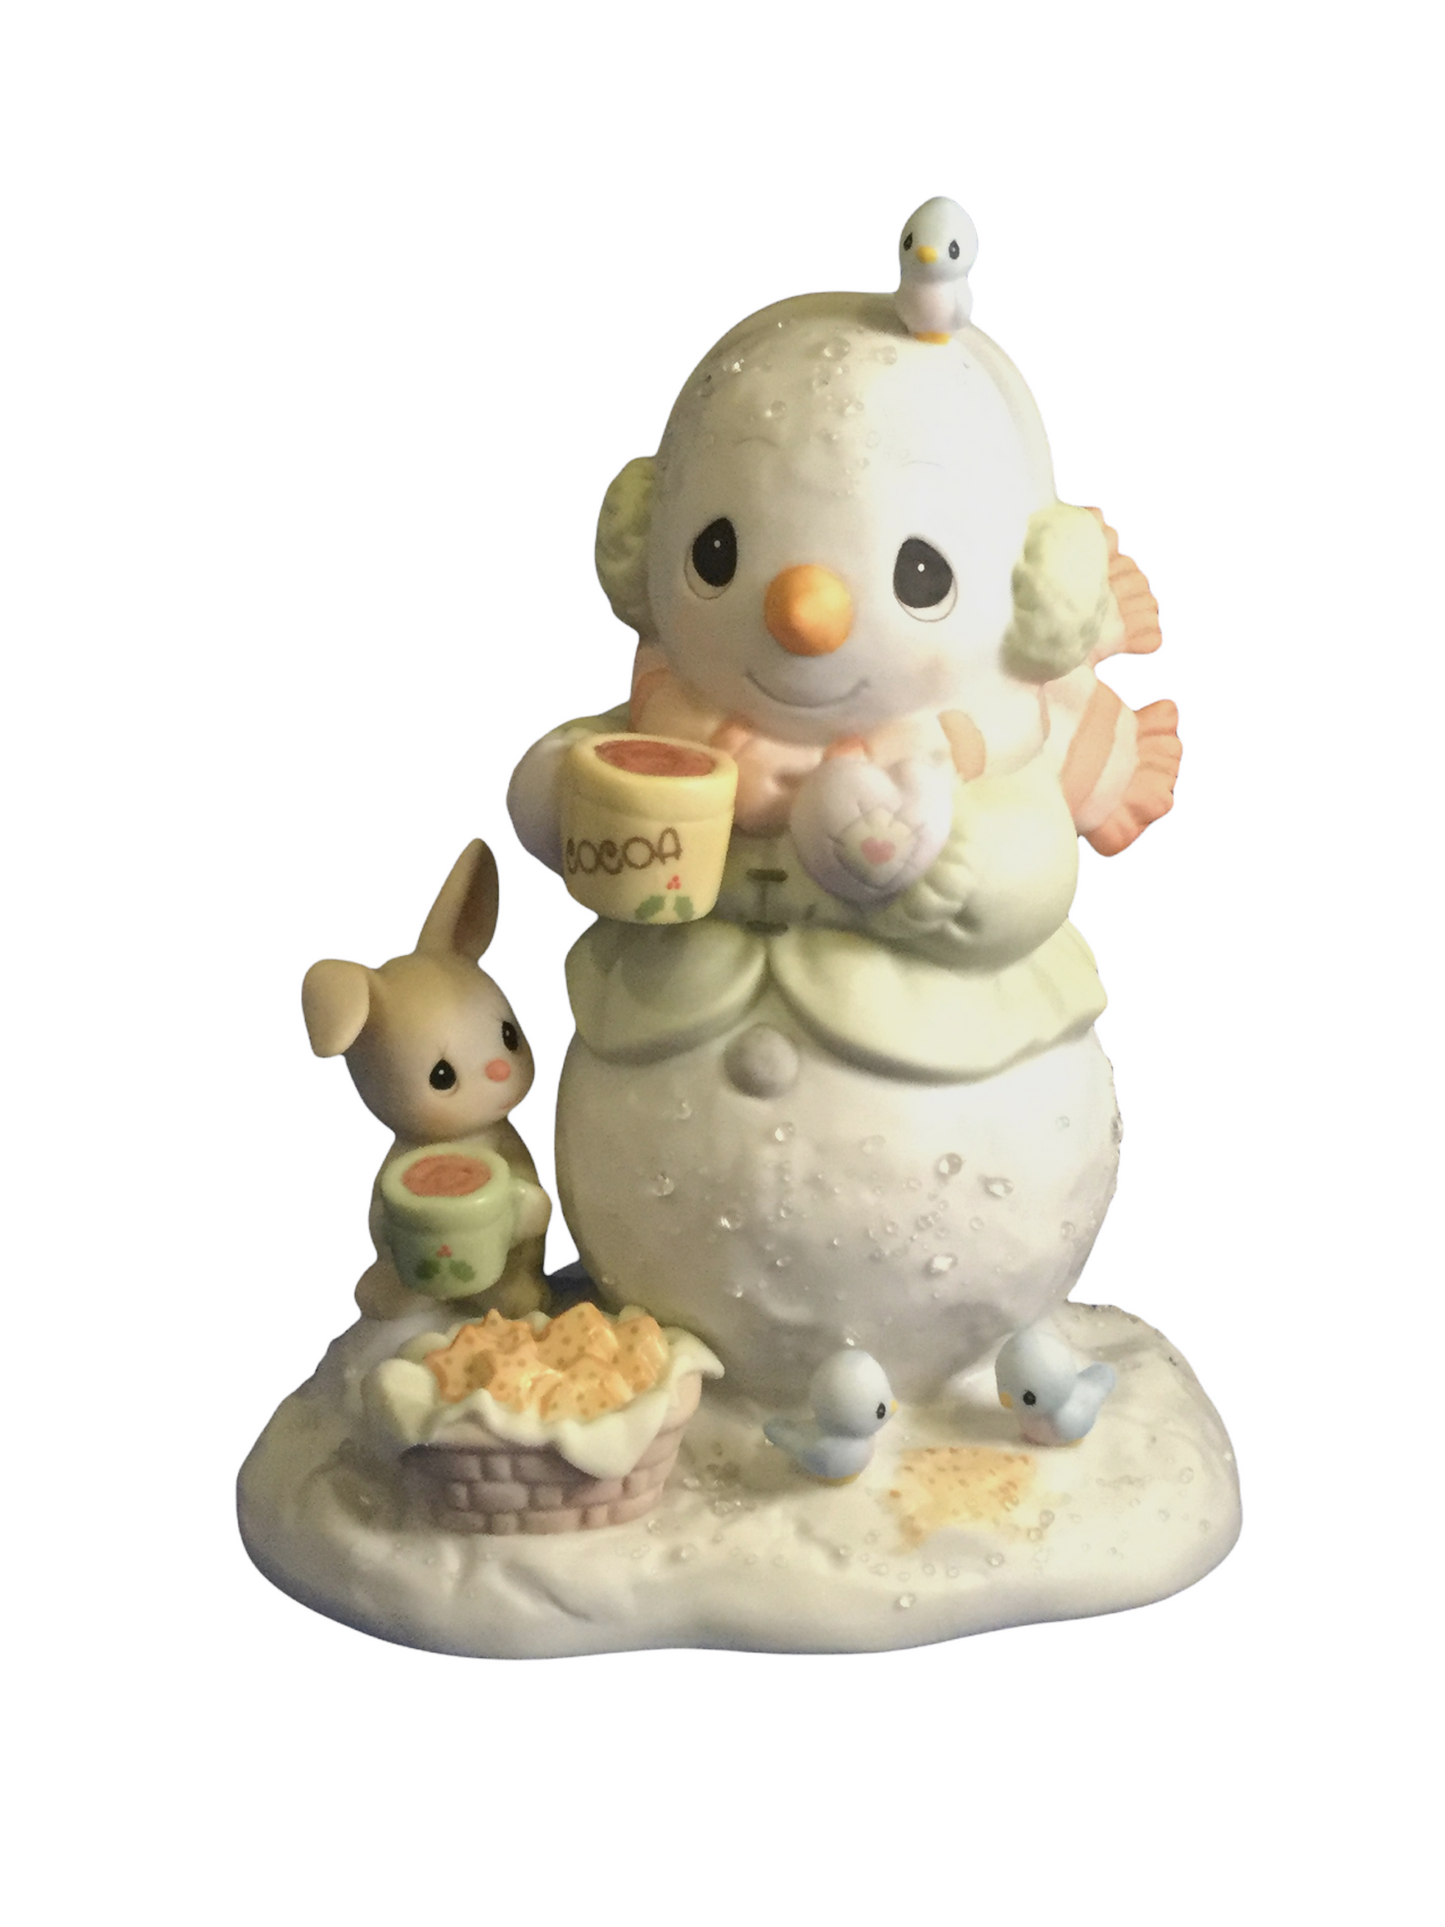 Warmest Wishes For The Holidays - Precious Moment Figurine